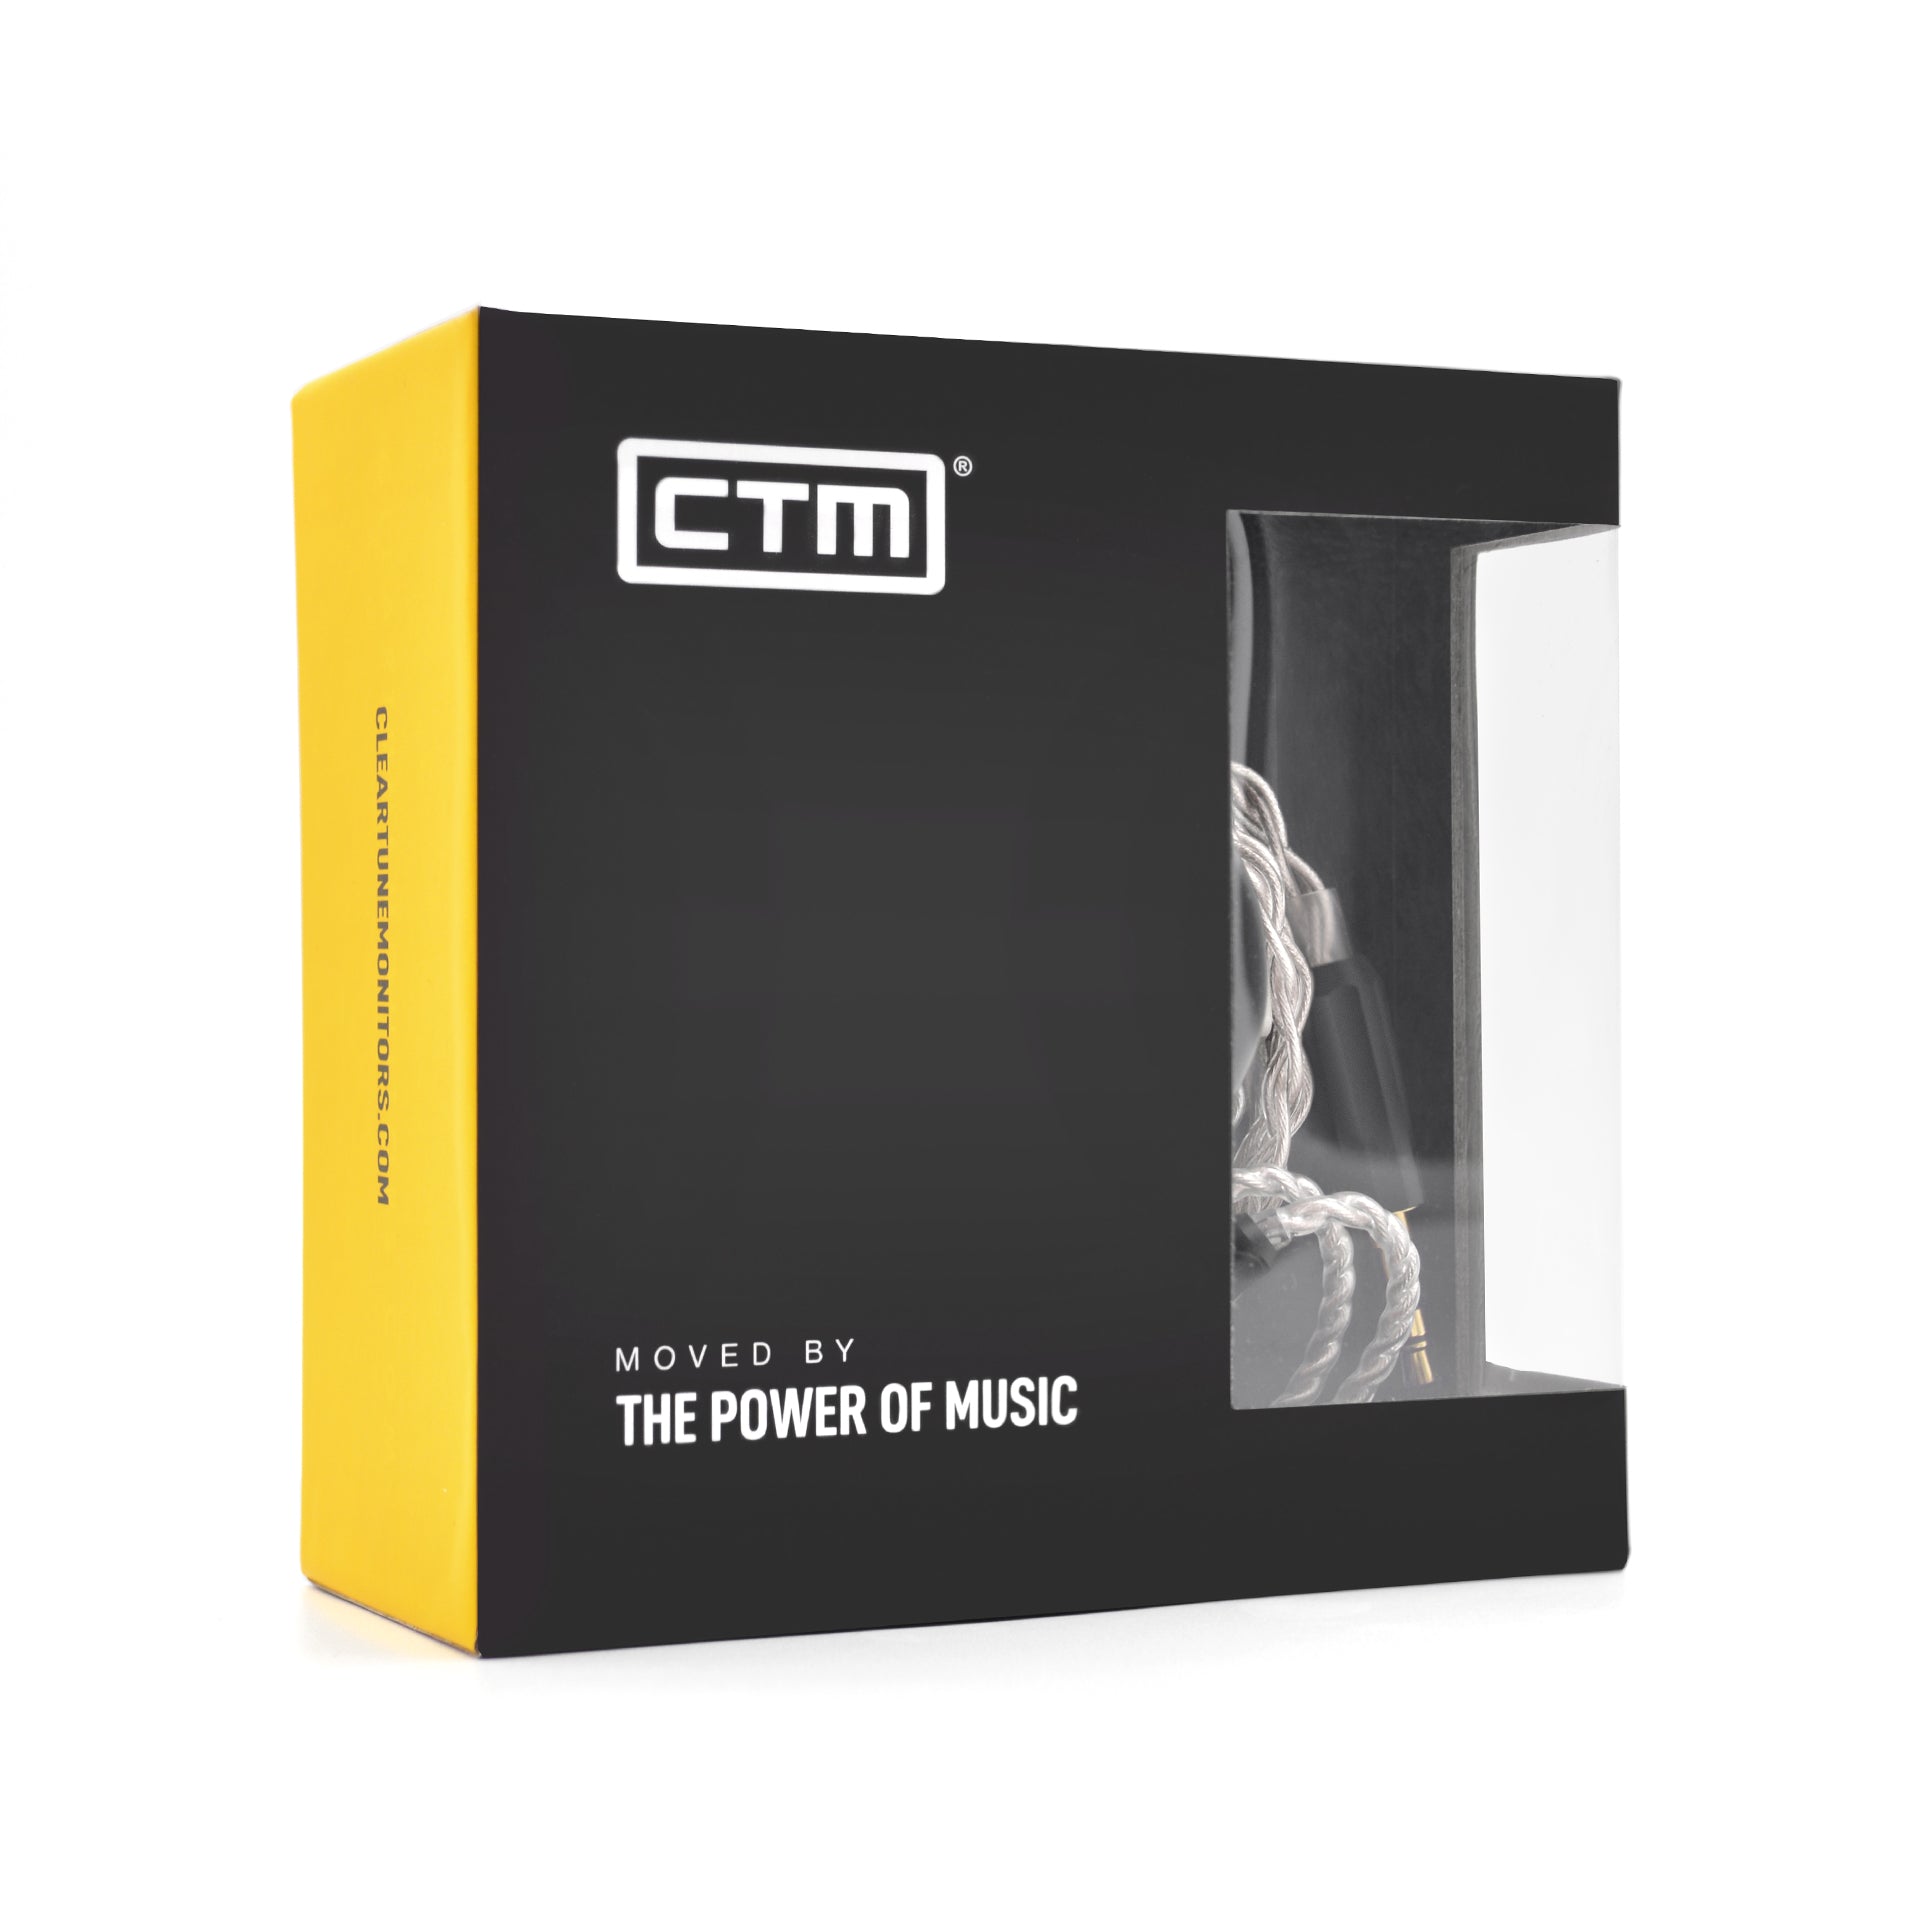 CTM Okoi Silver 4-Wire Premium in-Ear Cable by Clear Tune Monitors